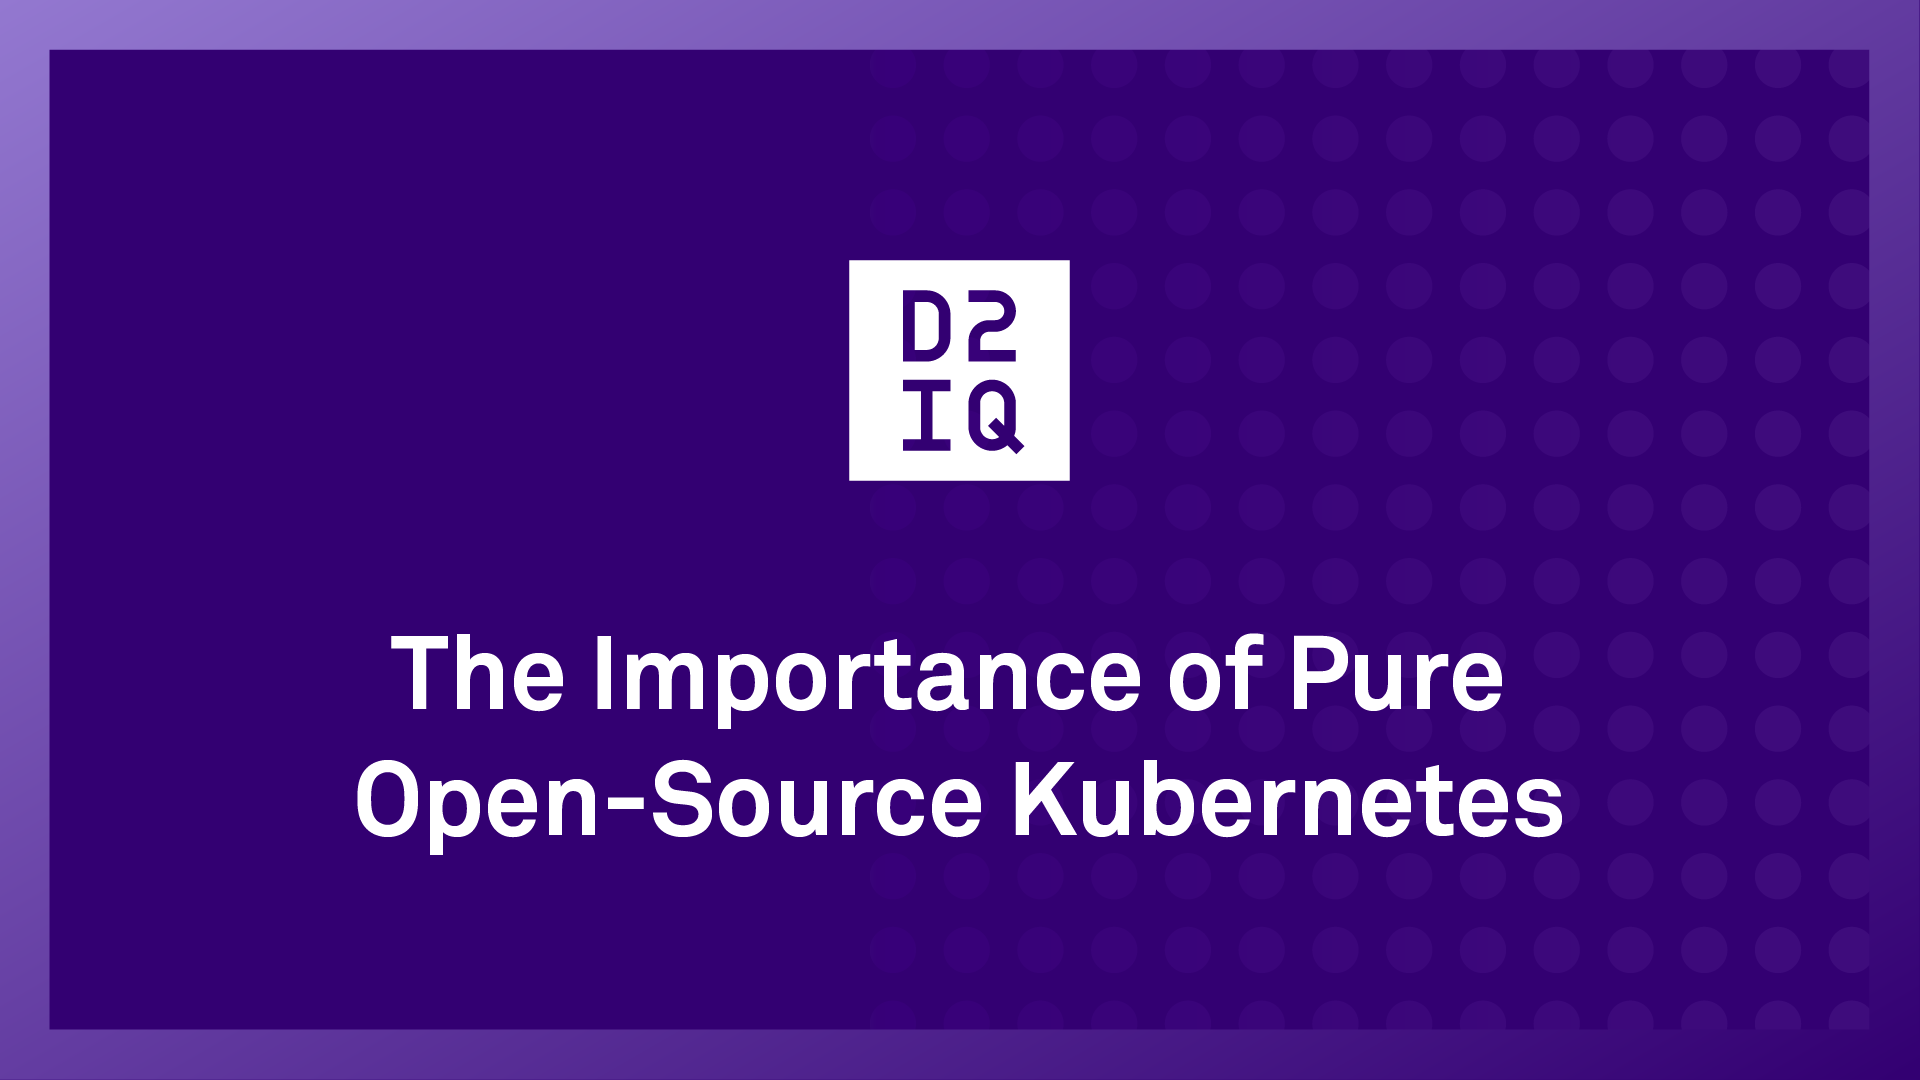 The Importance of Pure Open-Source Kubernetes